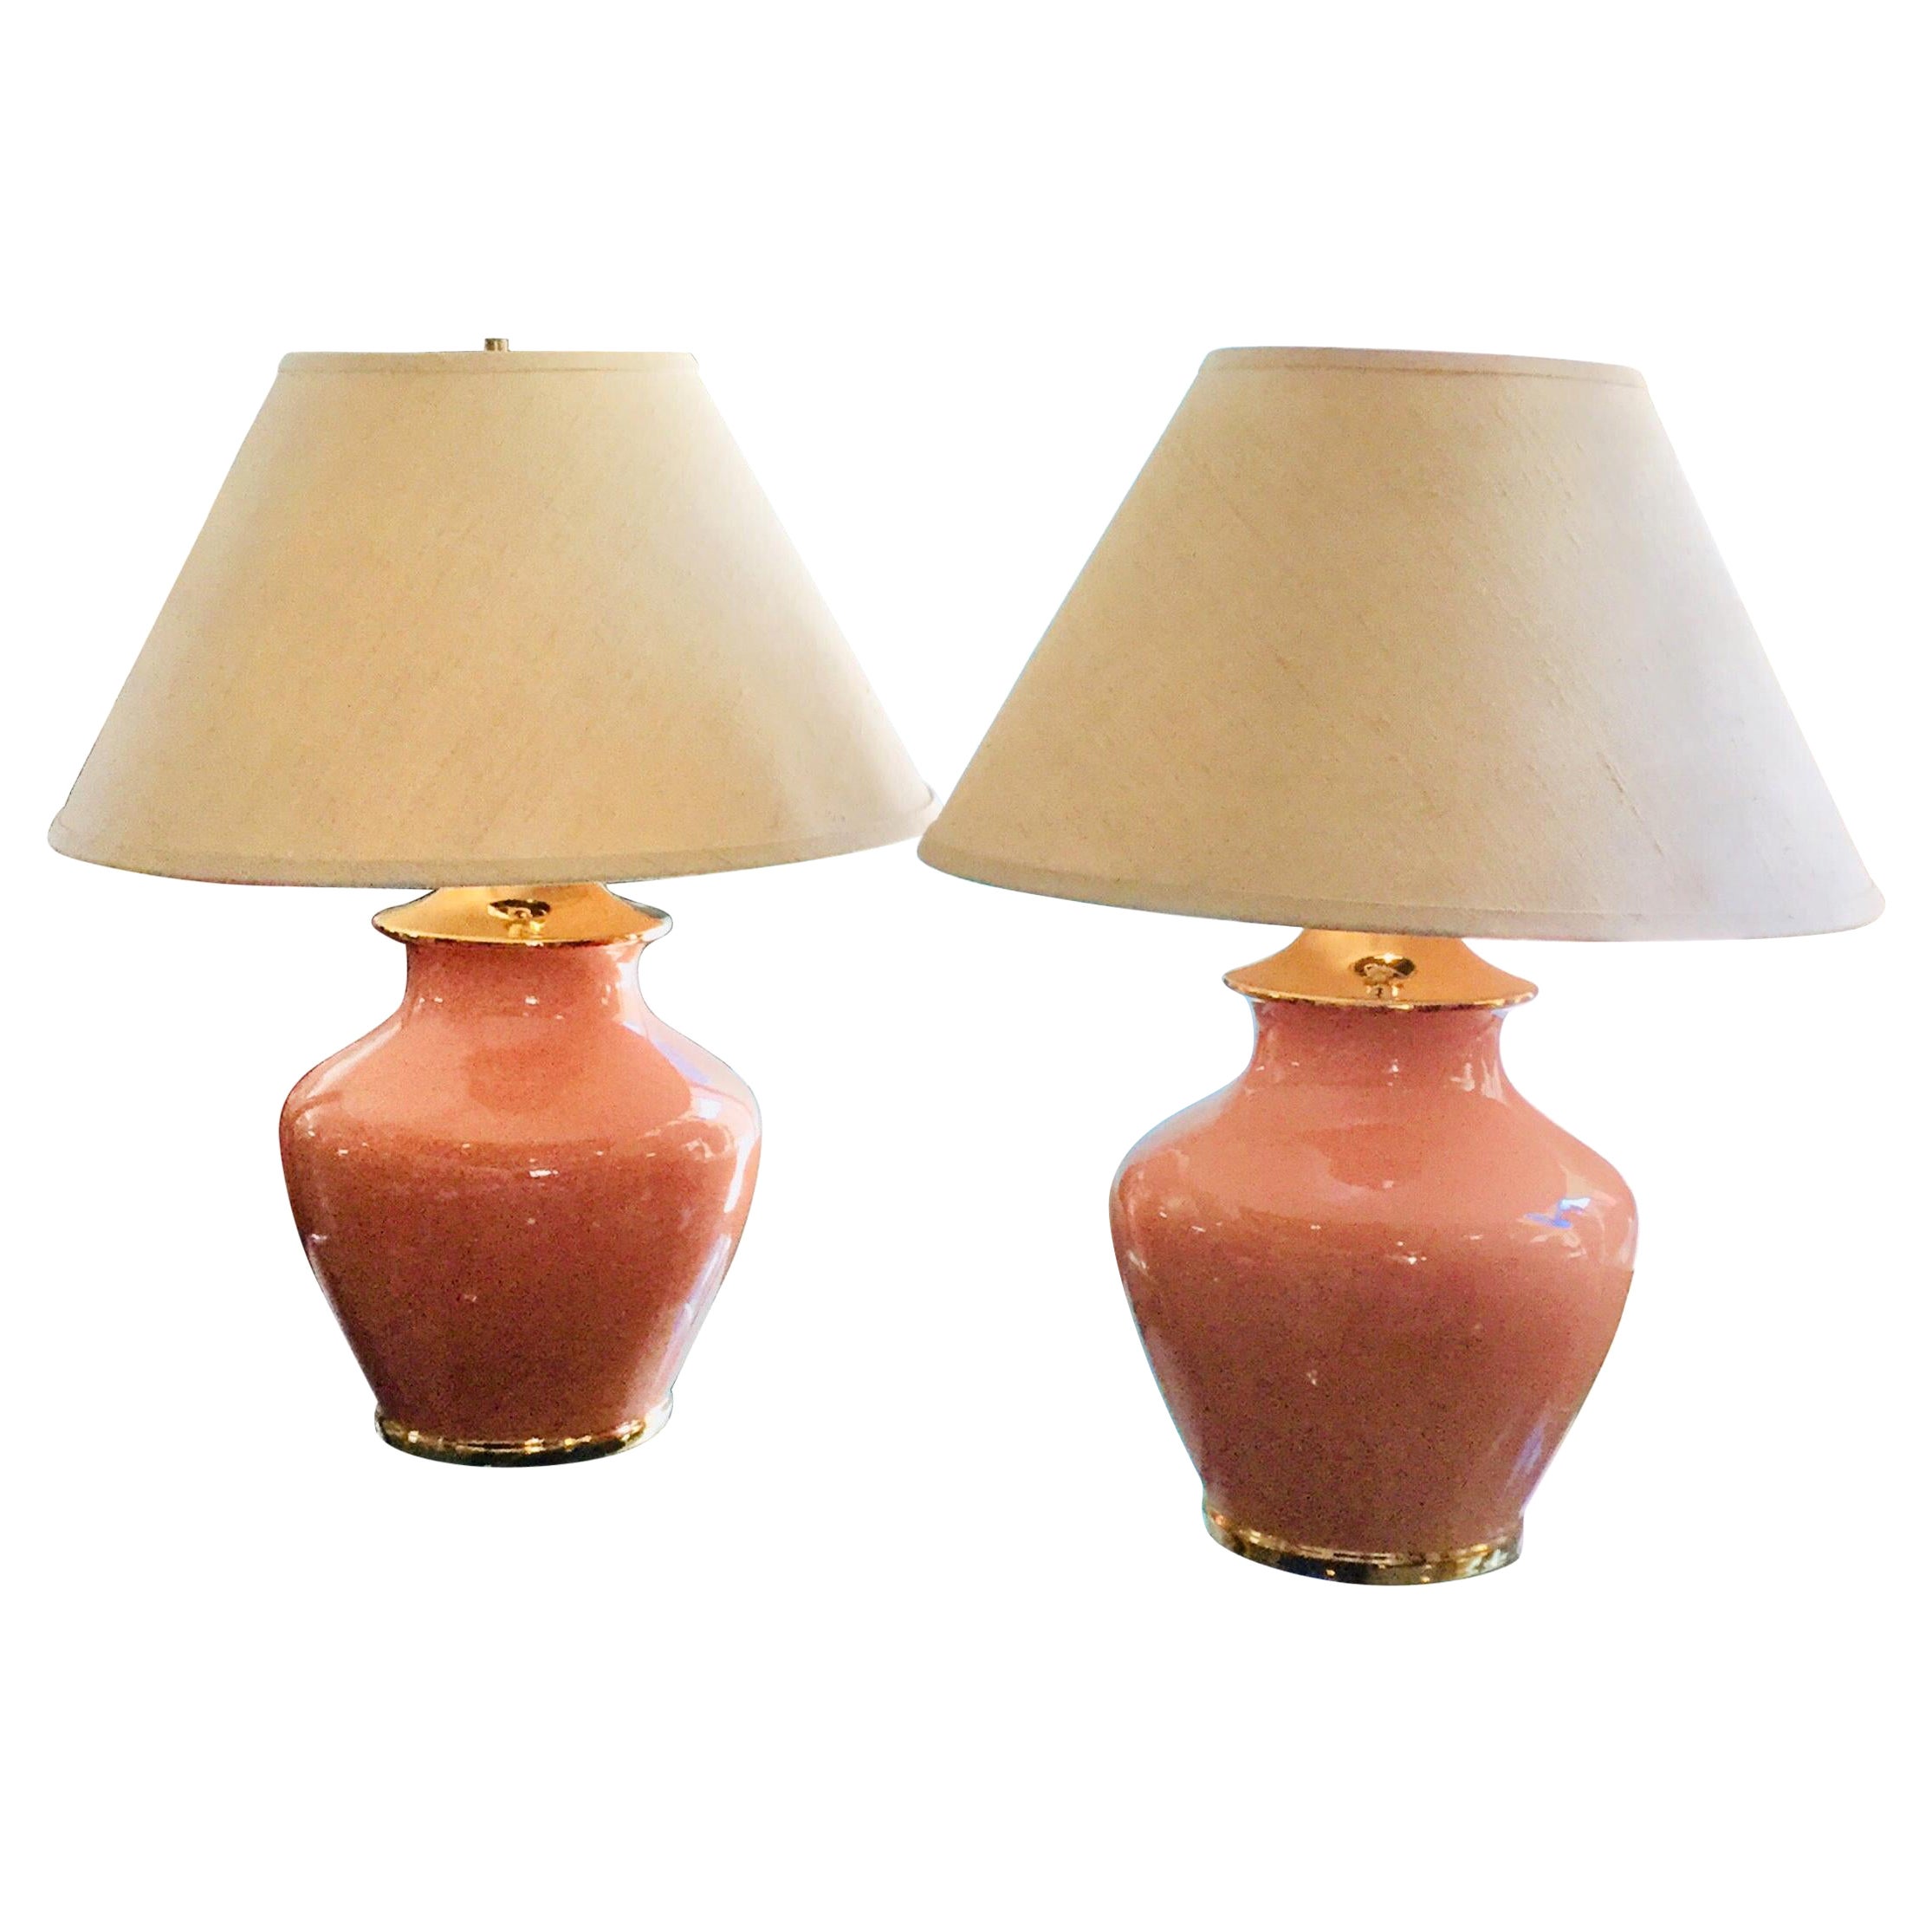 Vintage 1980s Coral and Gold Ceramic Lamps with Brass Trim Pair For Sale